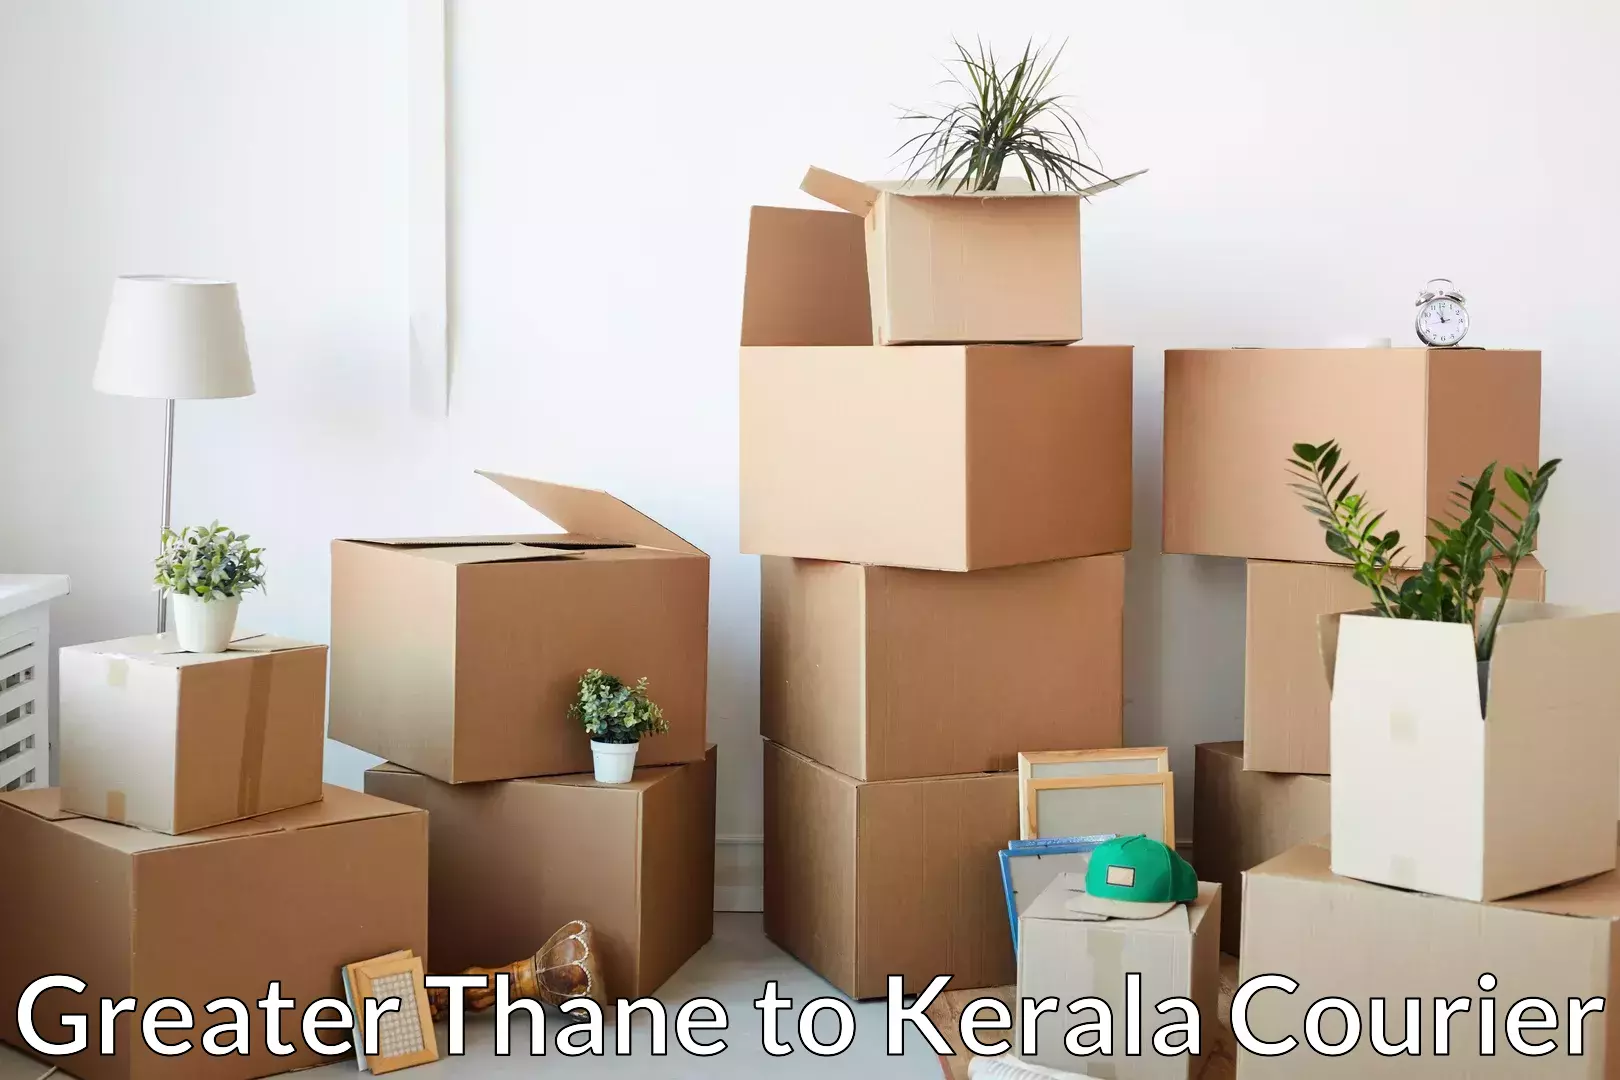 Household moving experts Greater Thane to Pandikkad